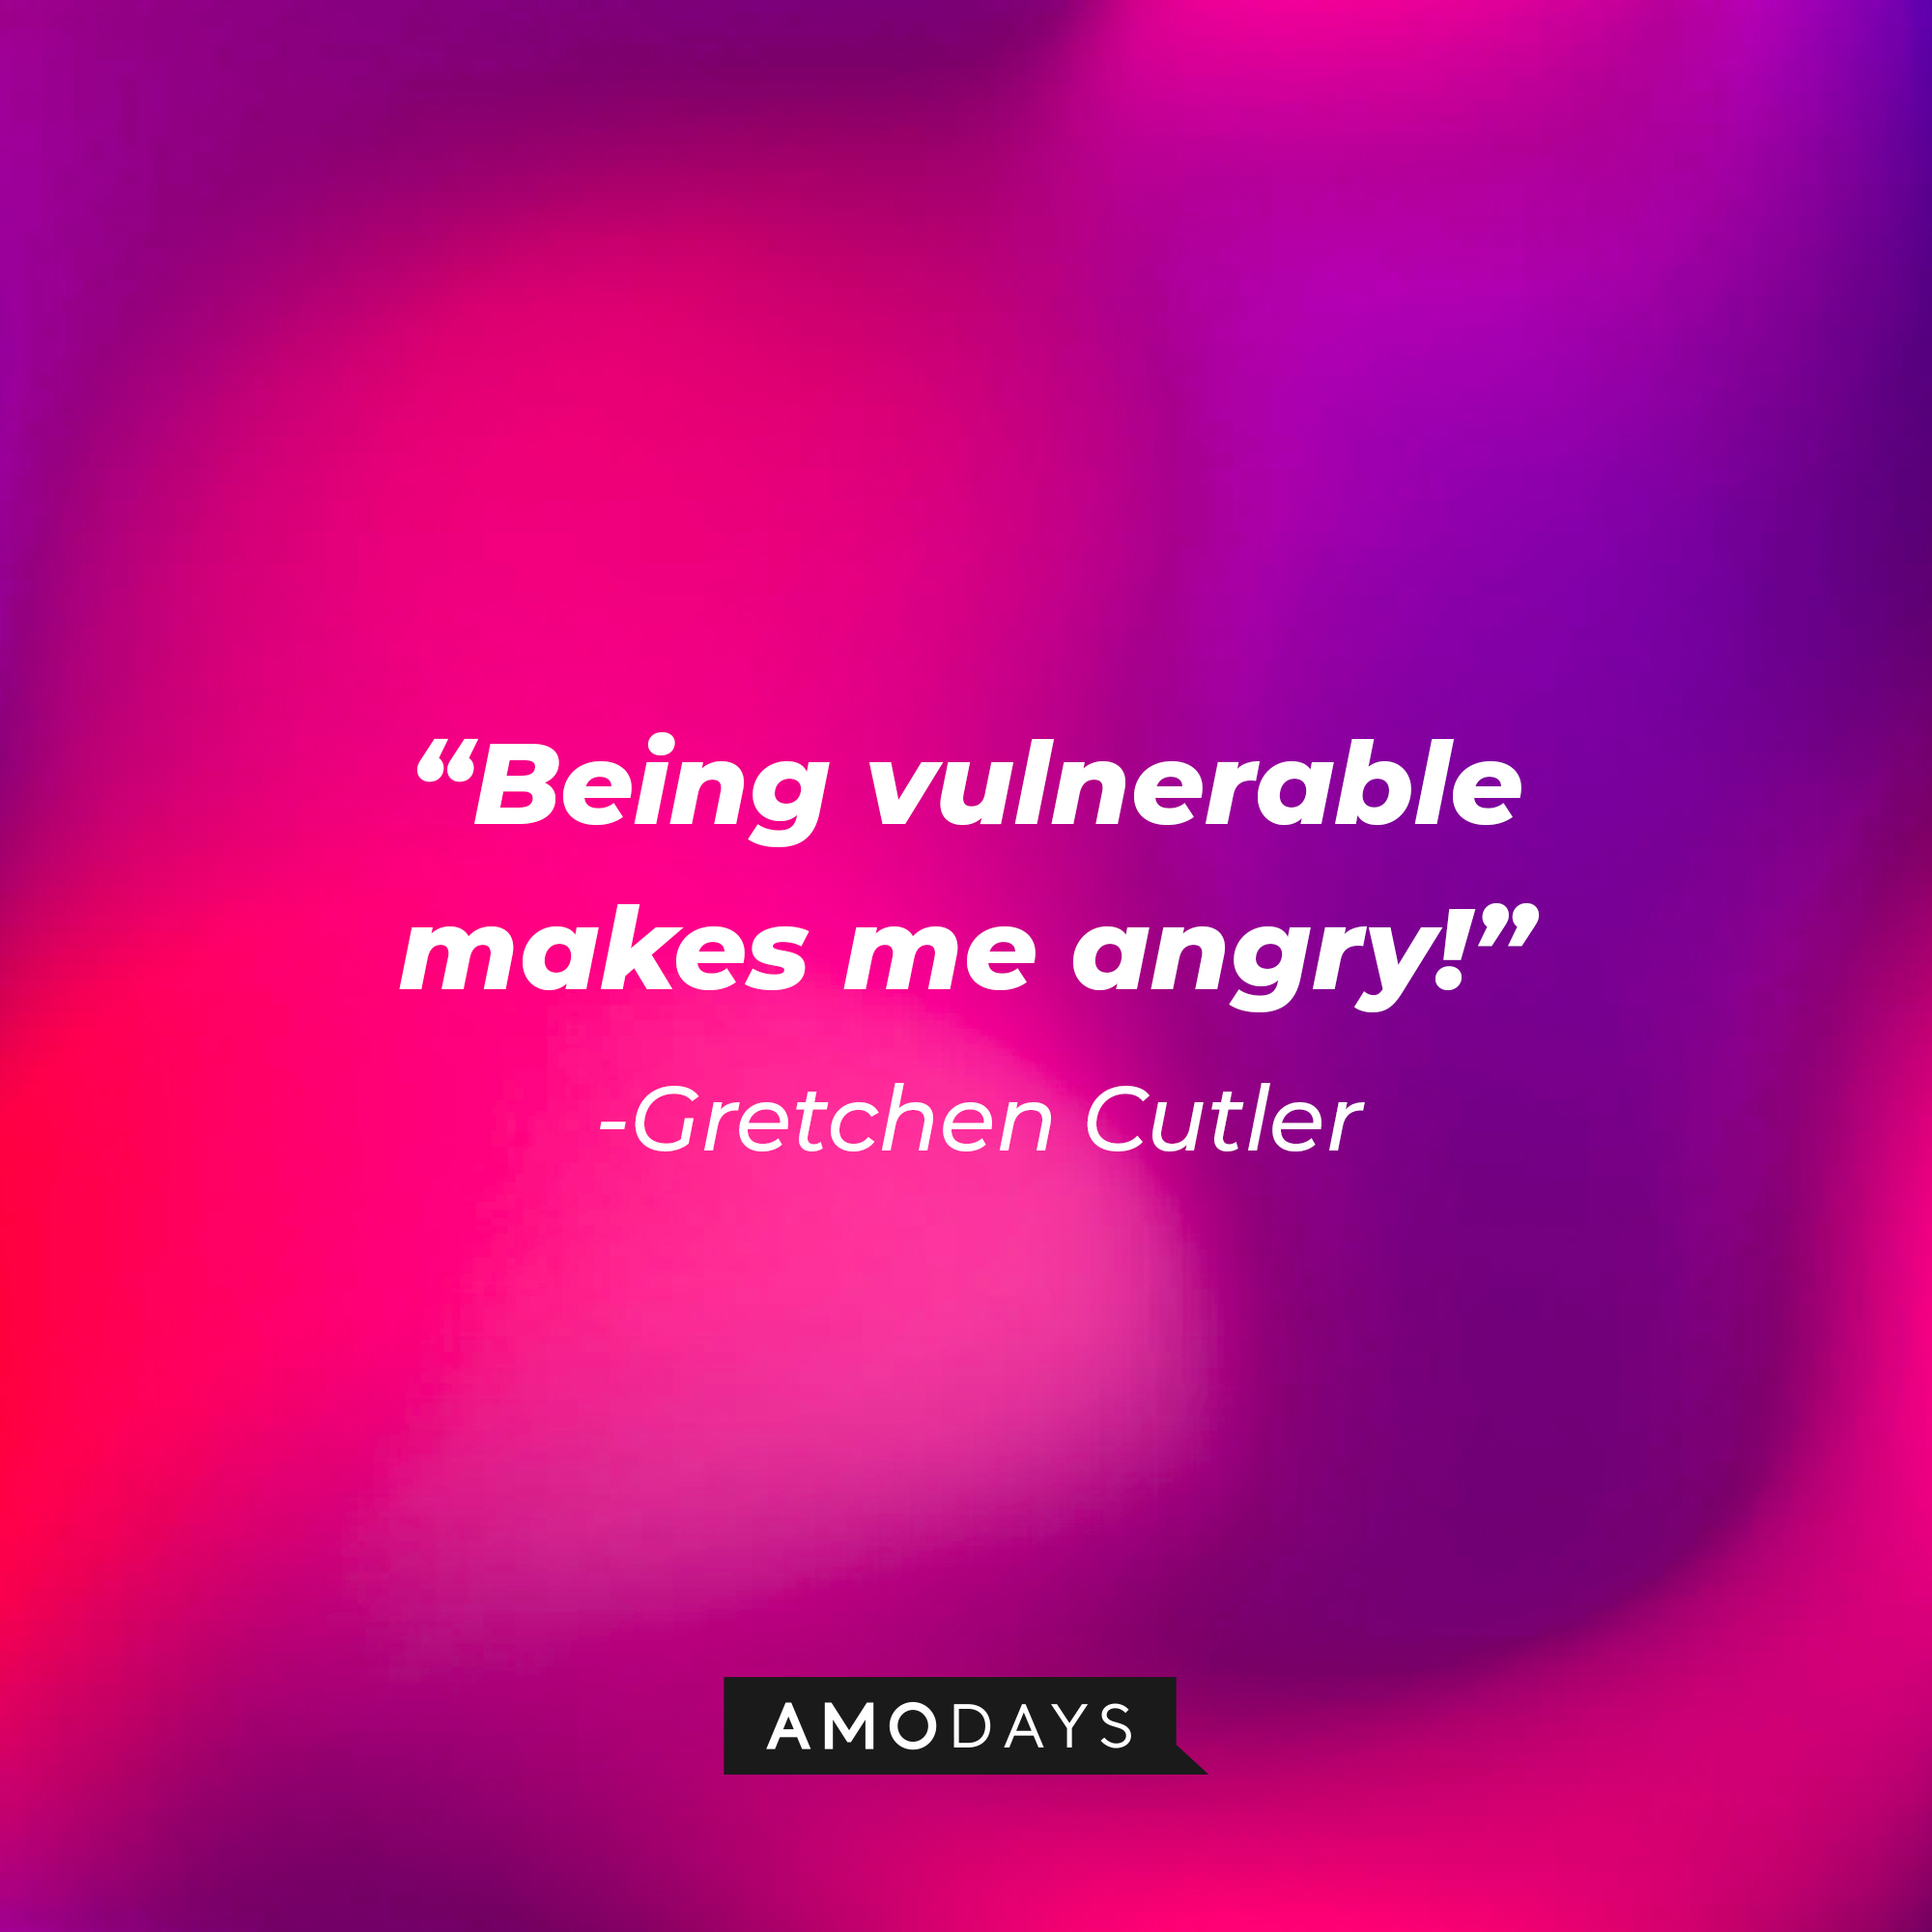 Gretchen Cutler’s quote: “Being vulnerable makes me angry!” | Source: AmoDays